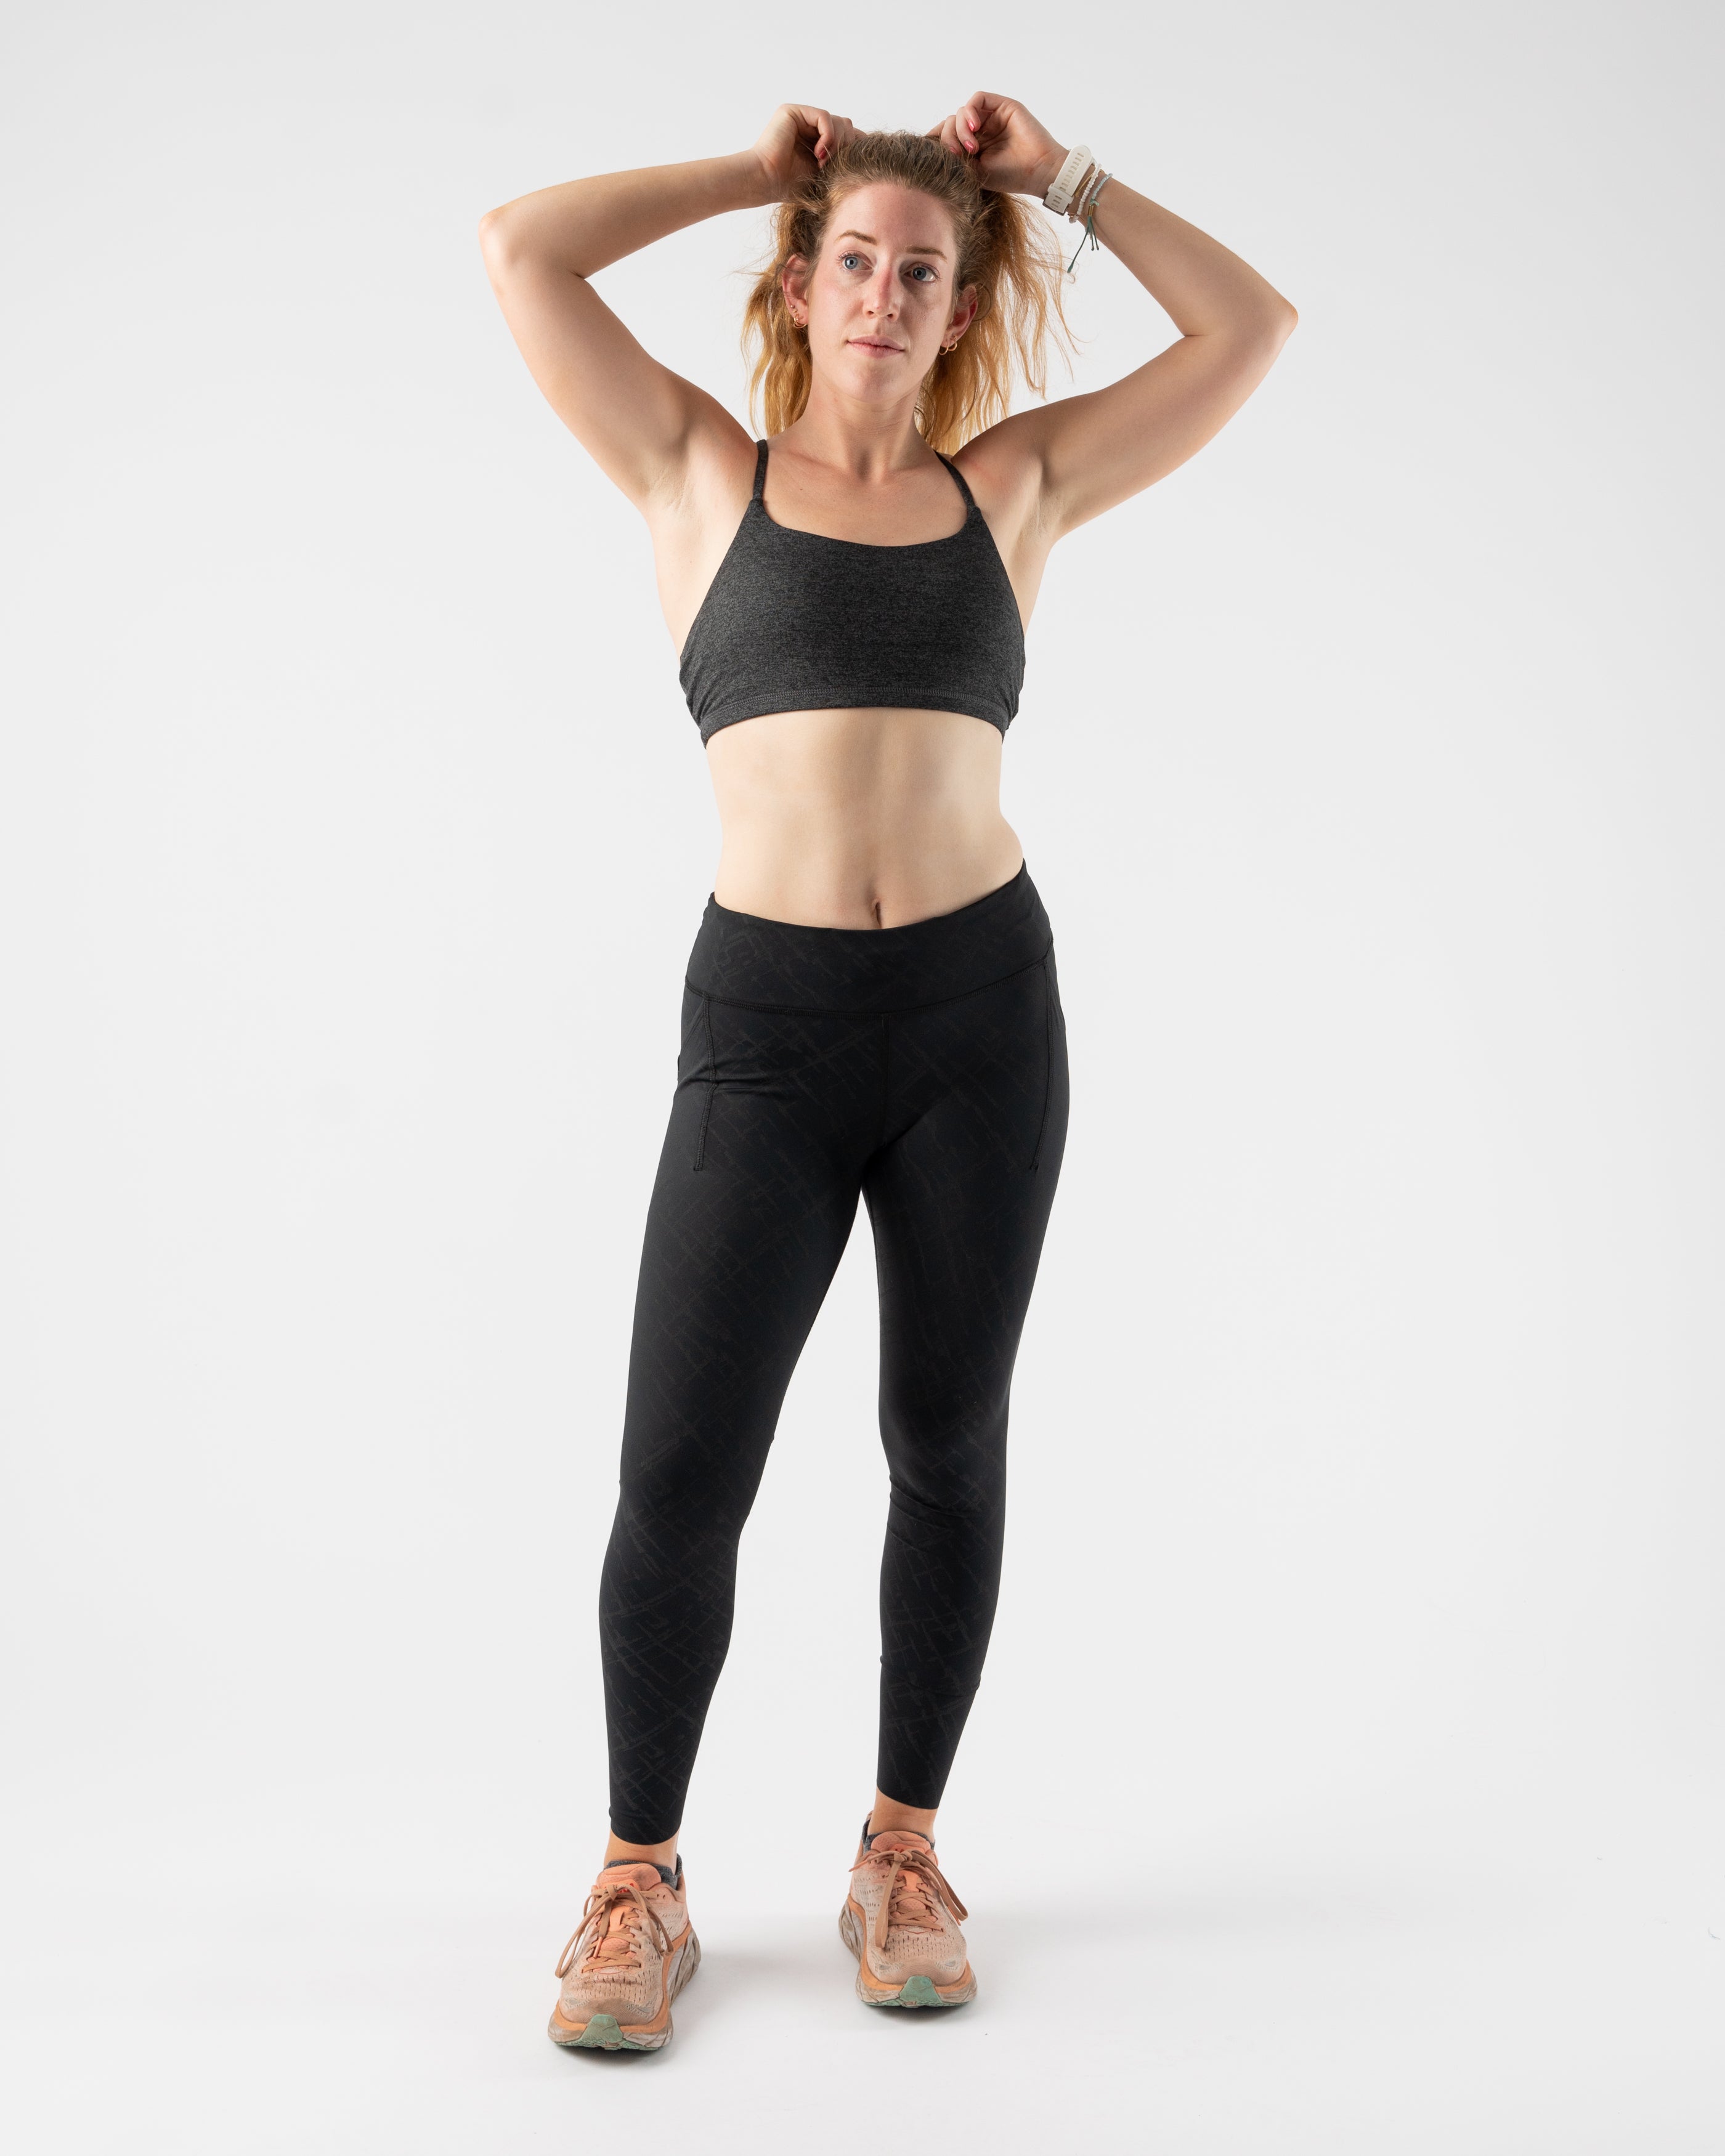 Wearing Activewear for a job? Yes Please! - ZYIA ACTIVE